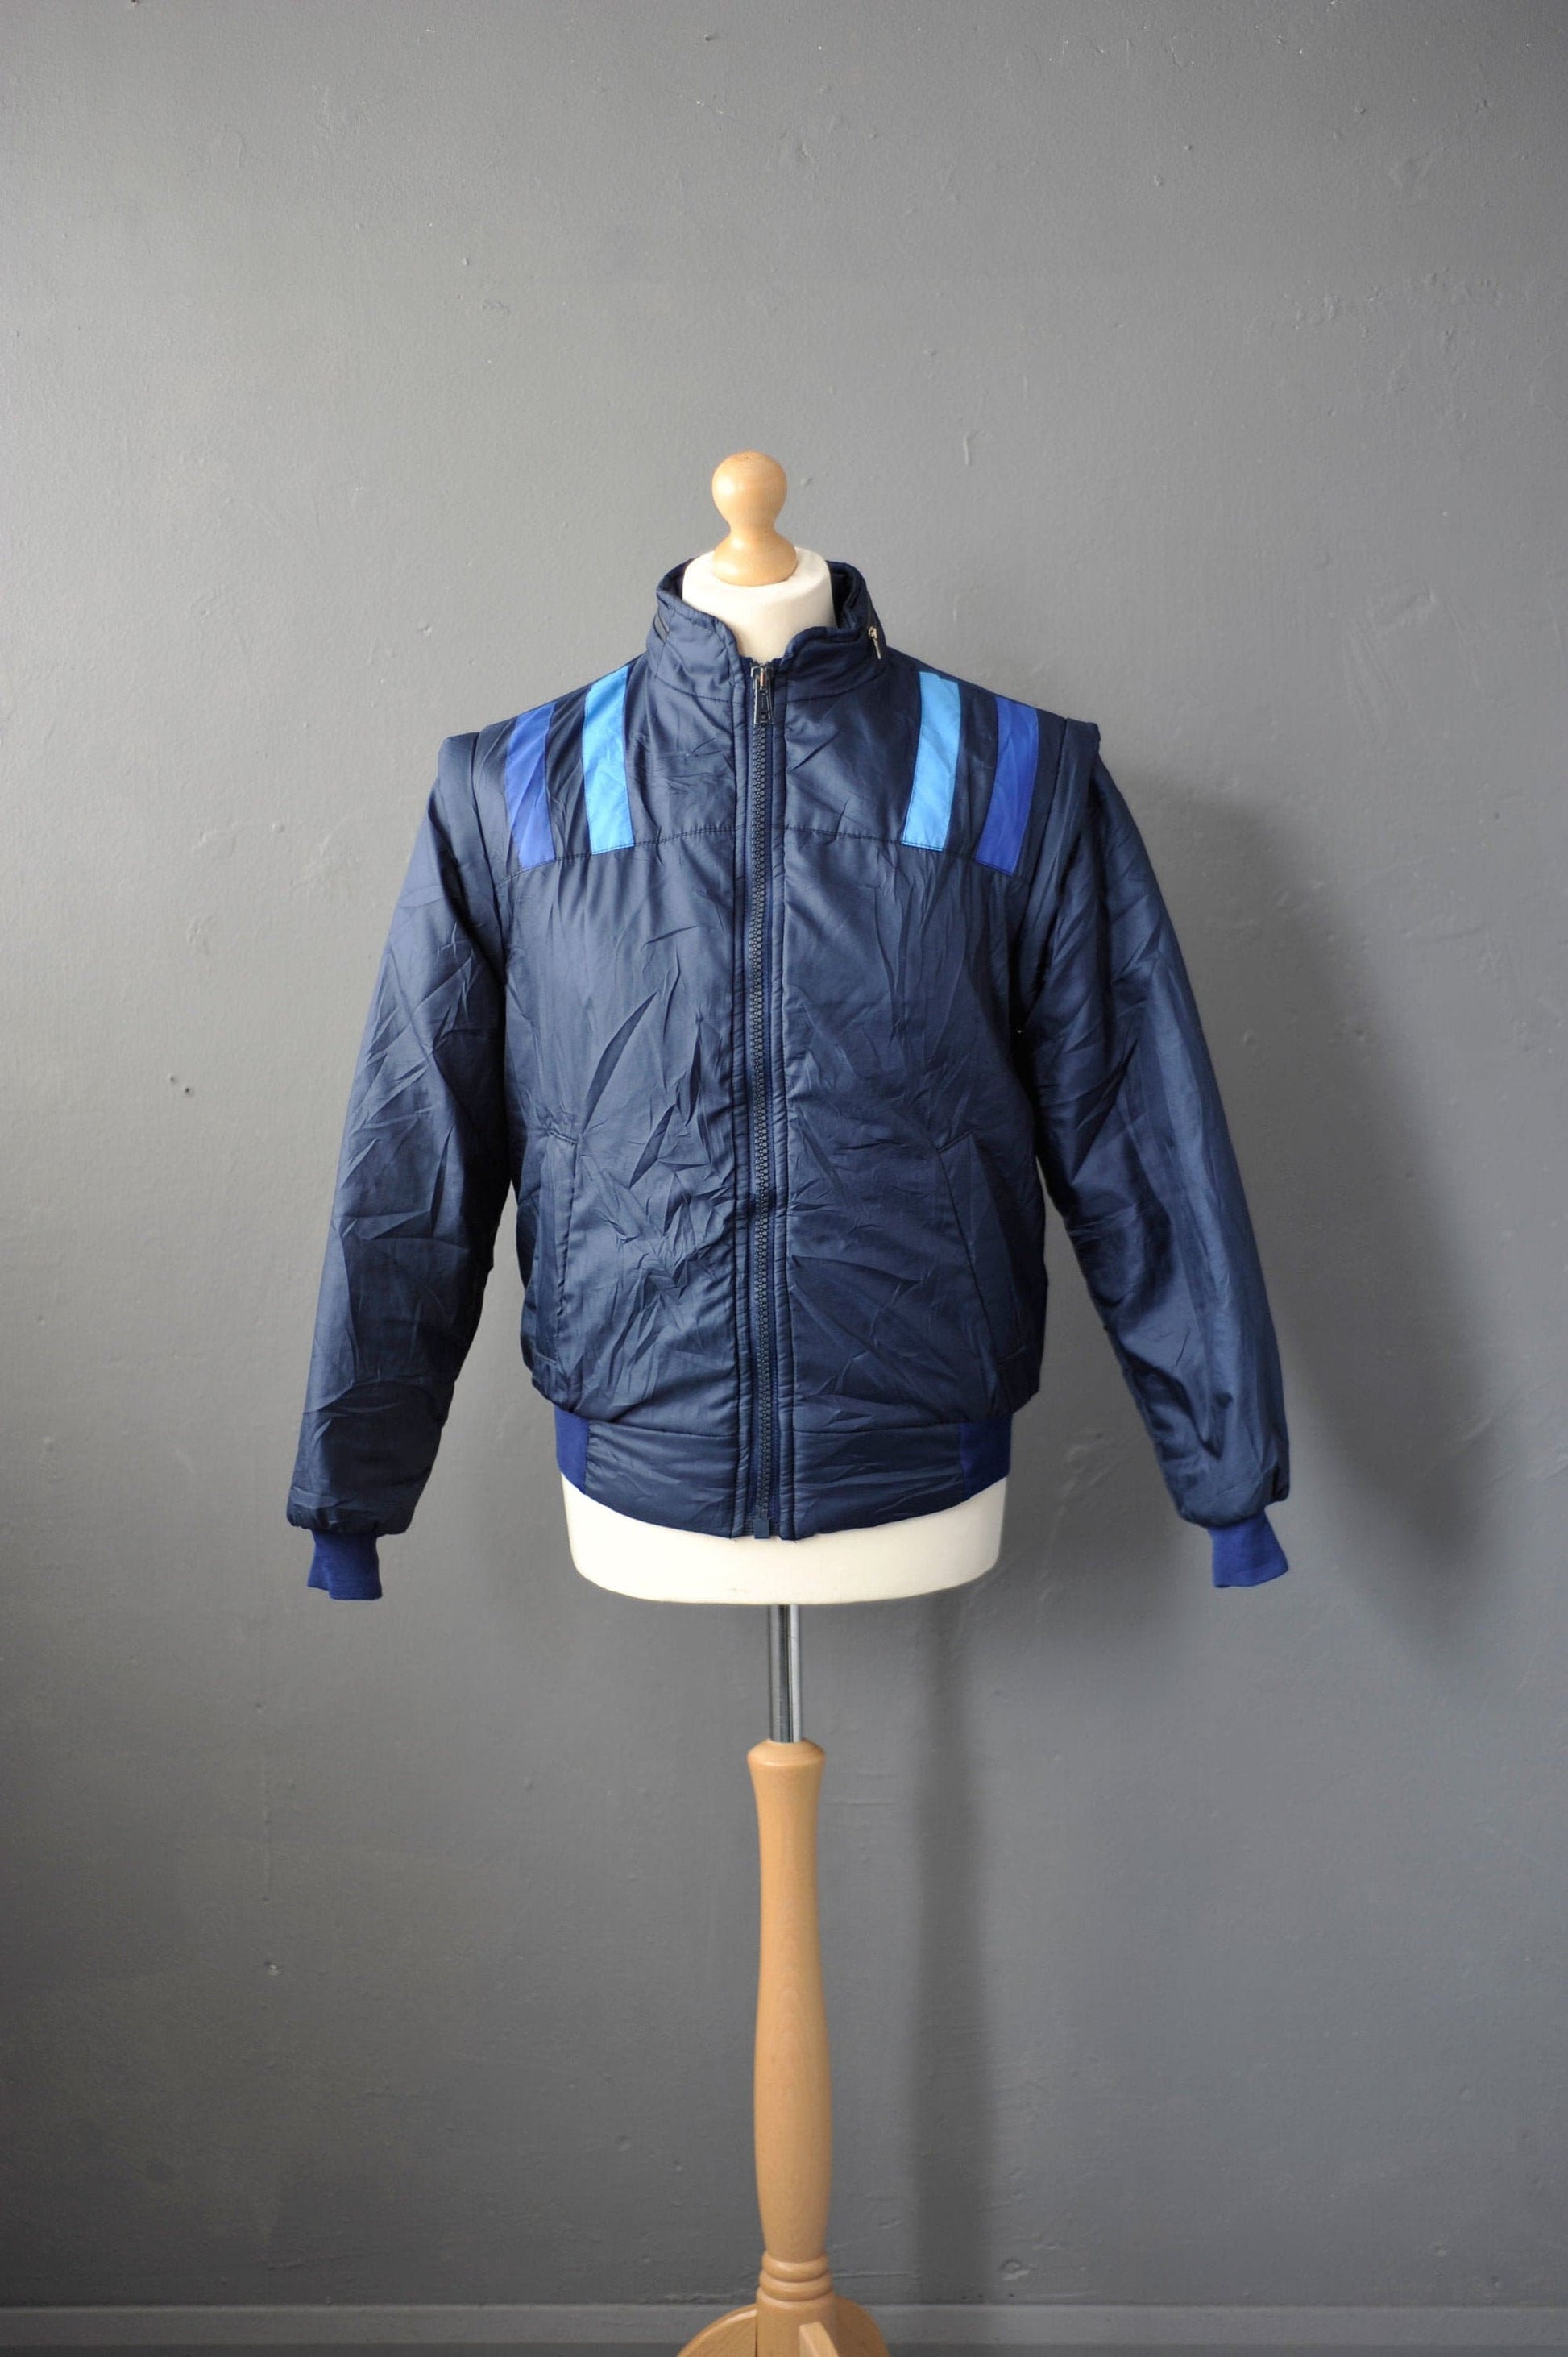 80s Padded Ski Jacket with Removable Sleeves, Convertible Snow Coat Gilet, Retro Winter Sports, Size Medium